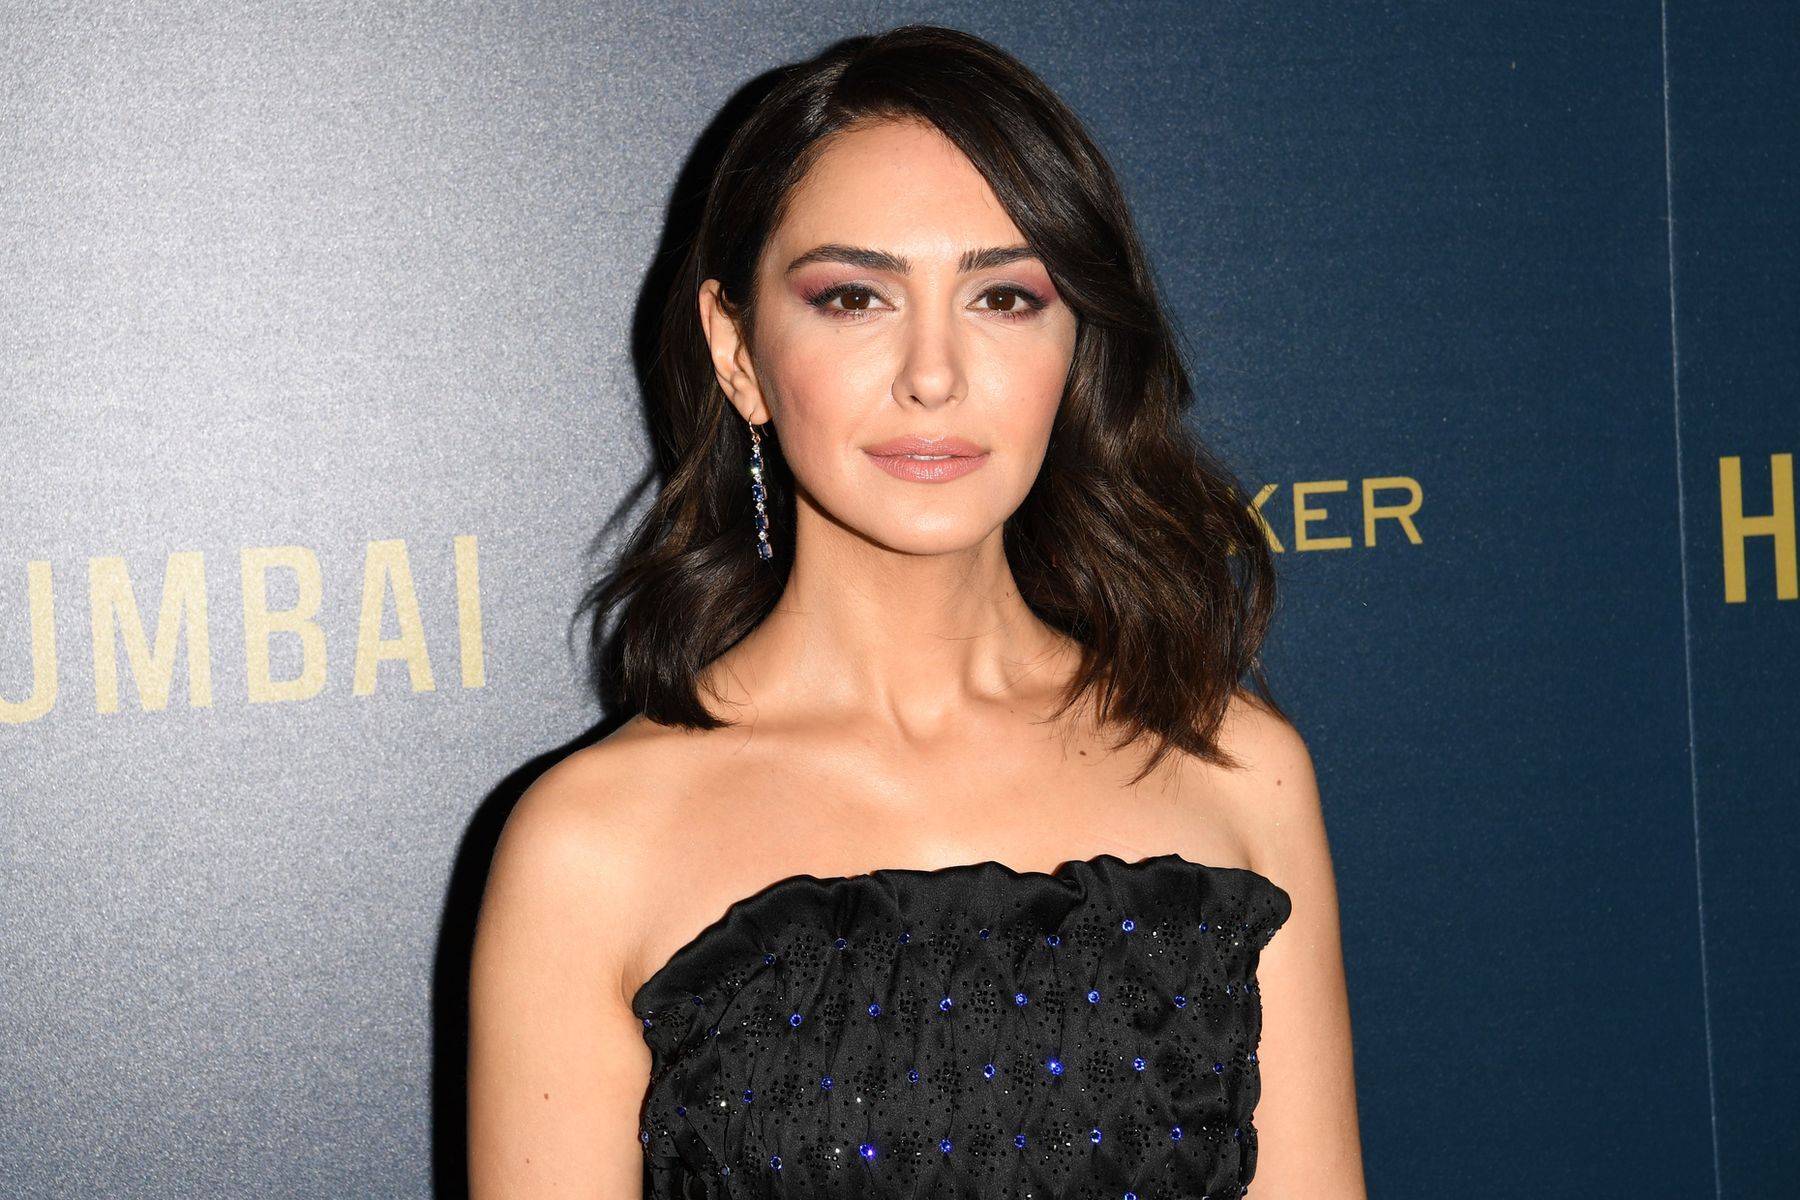 <p>According to reports, Cruise’s next relationship, with <em>General Hospital</em> star <a href="https://www.imdb.com/name/nm2258164/bio">Nazanin Boniadi</a>, was orchestrated by the Church of Scientology (though the church has denied such insinuations). <a href="https://nypost.com/2013/10/23/who-needs-tom-cruise-scientology-gal-speaks-out/">The allegations, which included extreme descriptions of how Boniadi was prepped to meet the star, were made in HBO’s documentary about Scientology, </a><a href="https://nypost.com/2013/10/23/who-needs-tom-cruise-scientology-gal-speaks-out/"><em>Going Clear</em></a>. The pair dated from November 2004 to January 2005. </p>